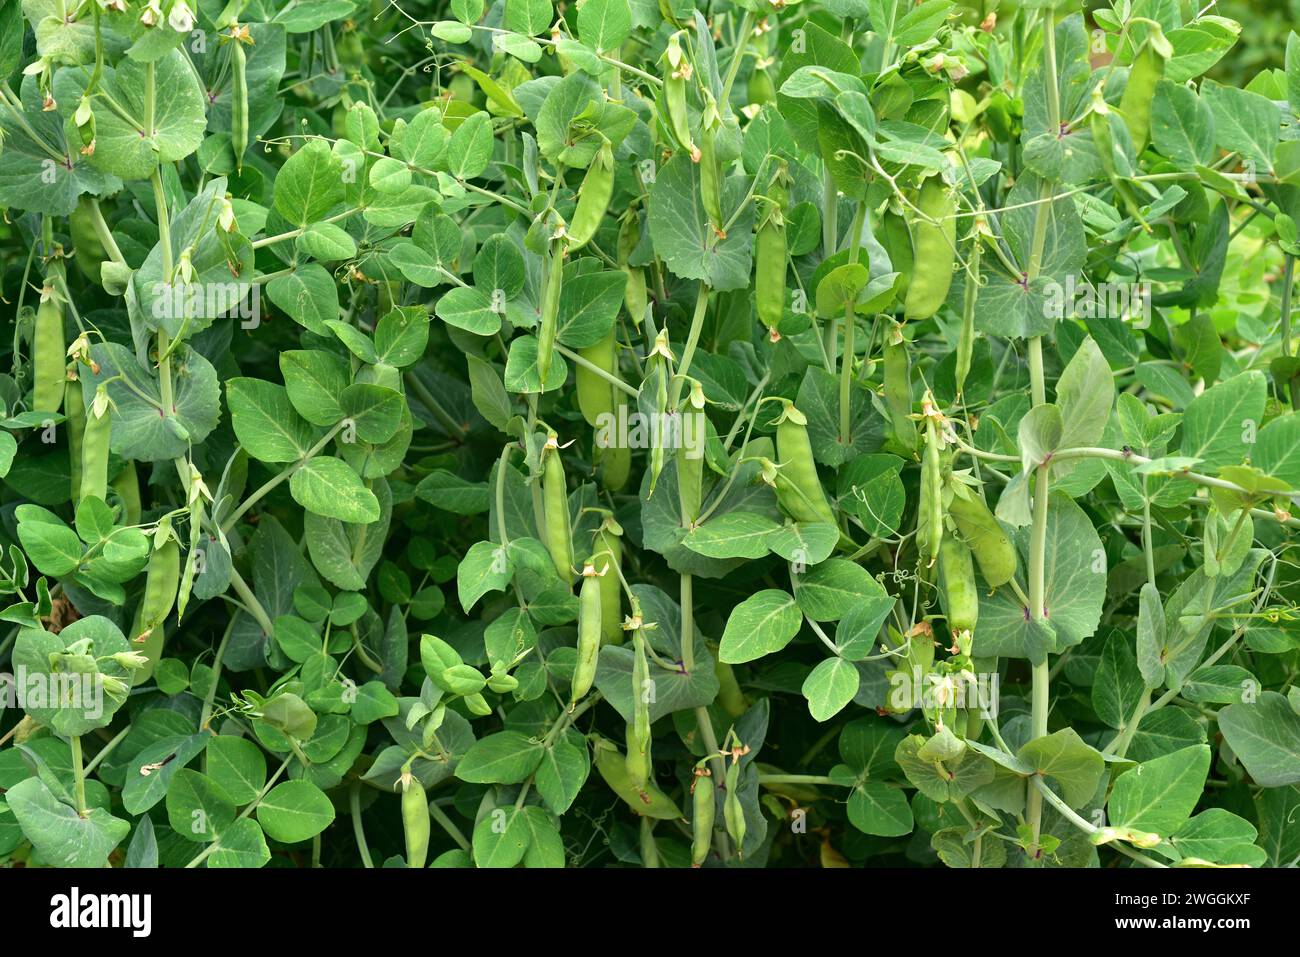 Snow pea or mangetout (Pisum sativum saccharatum) is an annual herb cultivated for its edible unripe fruits. Fruits detail. Stock Photo